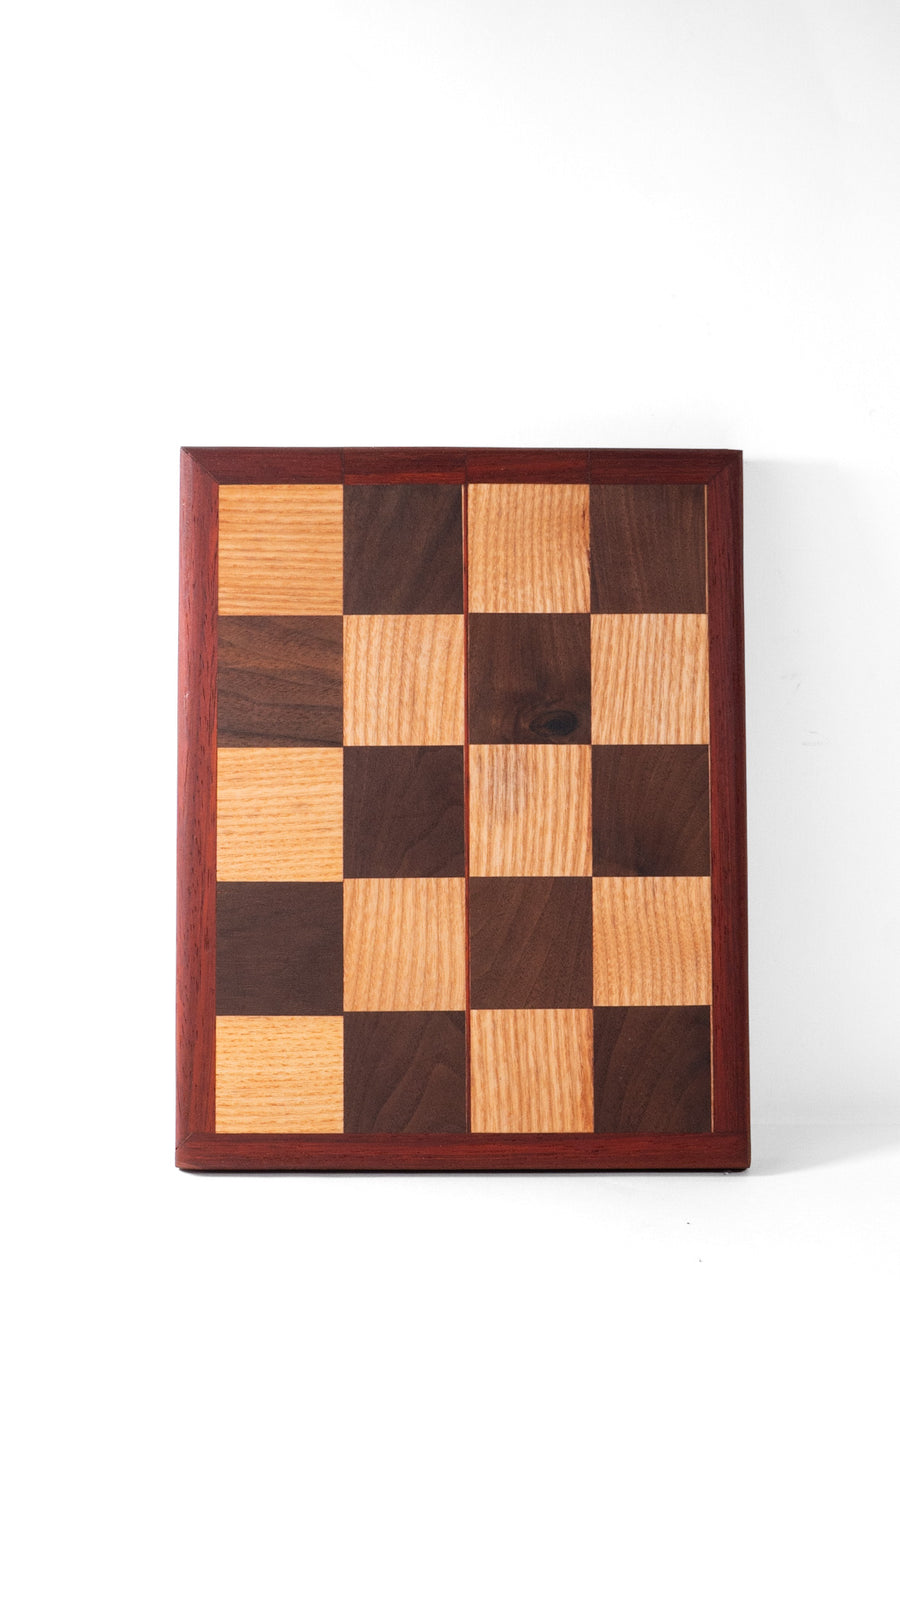 (134) Checkered Charcuterie Board 11"x8.5"x1" by Bearded Ginger Woodworking